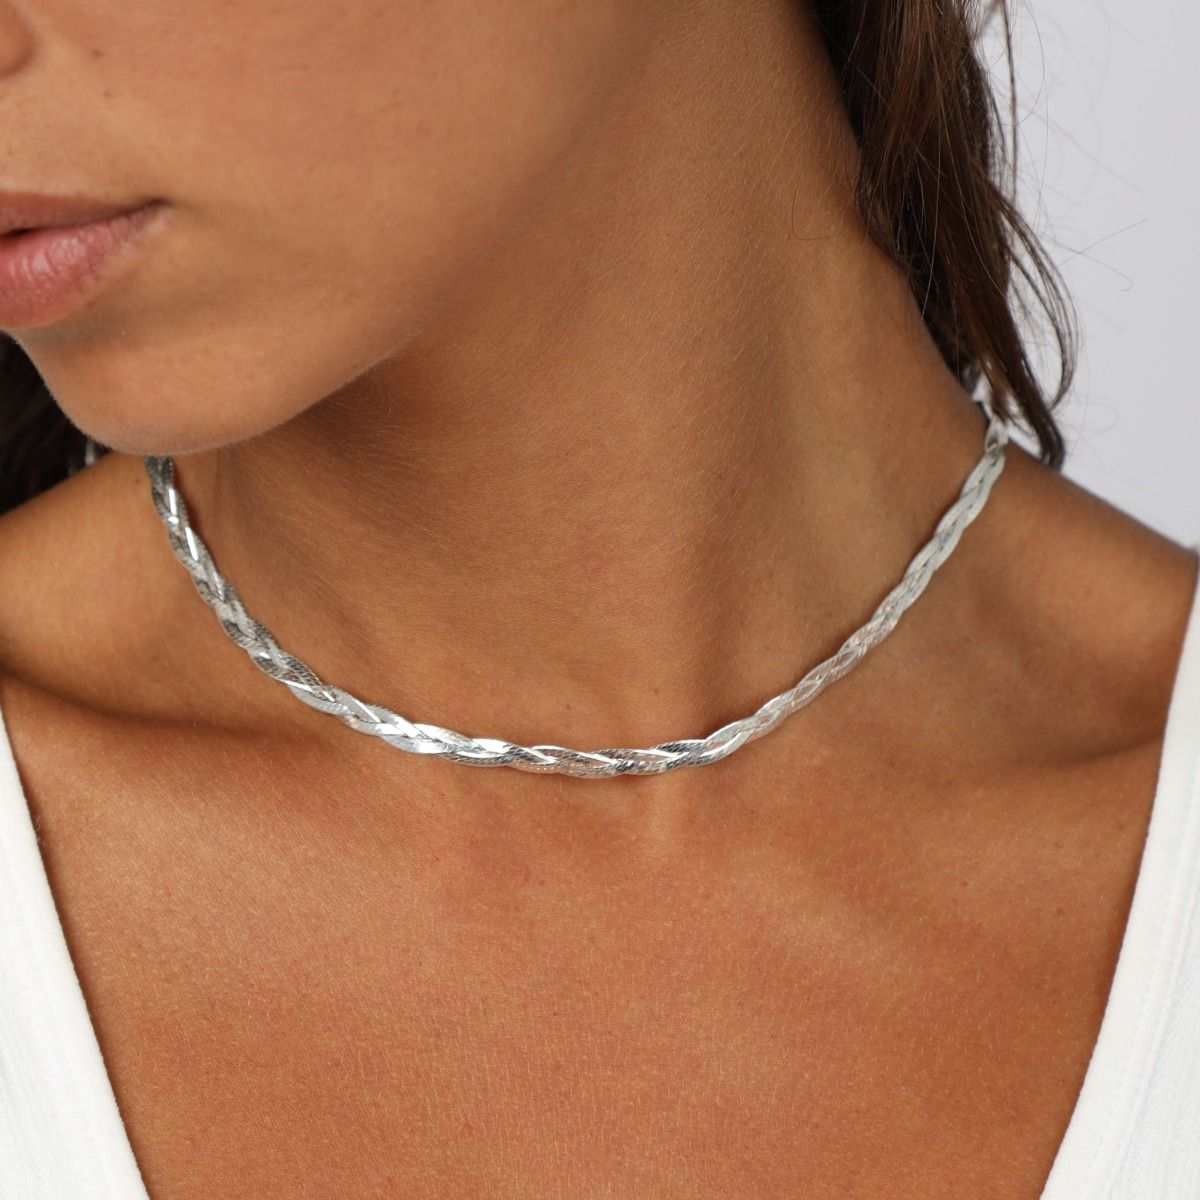 Silver Braided Herringbone Chain Necklace / 925 Sterling Silver / Twisted  Flat Snake Chain / 16 18 20 Inches / Women's Gift for Her - Etsy Sweden